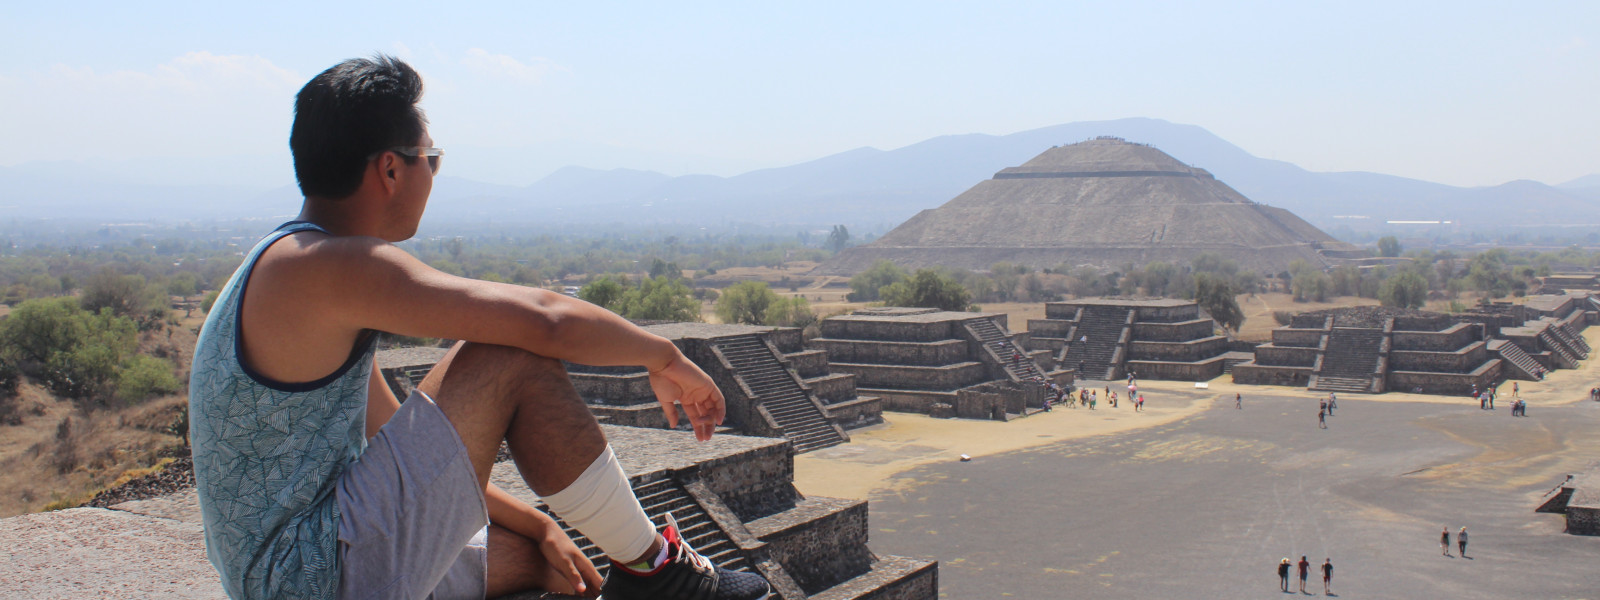 Student sitting and enjoying view of the Pyramid of the Moon